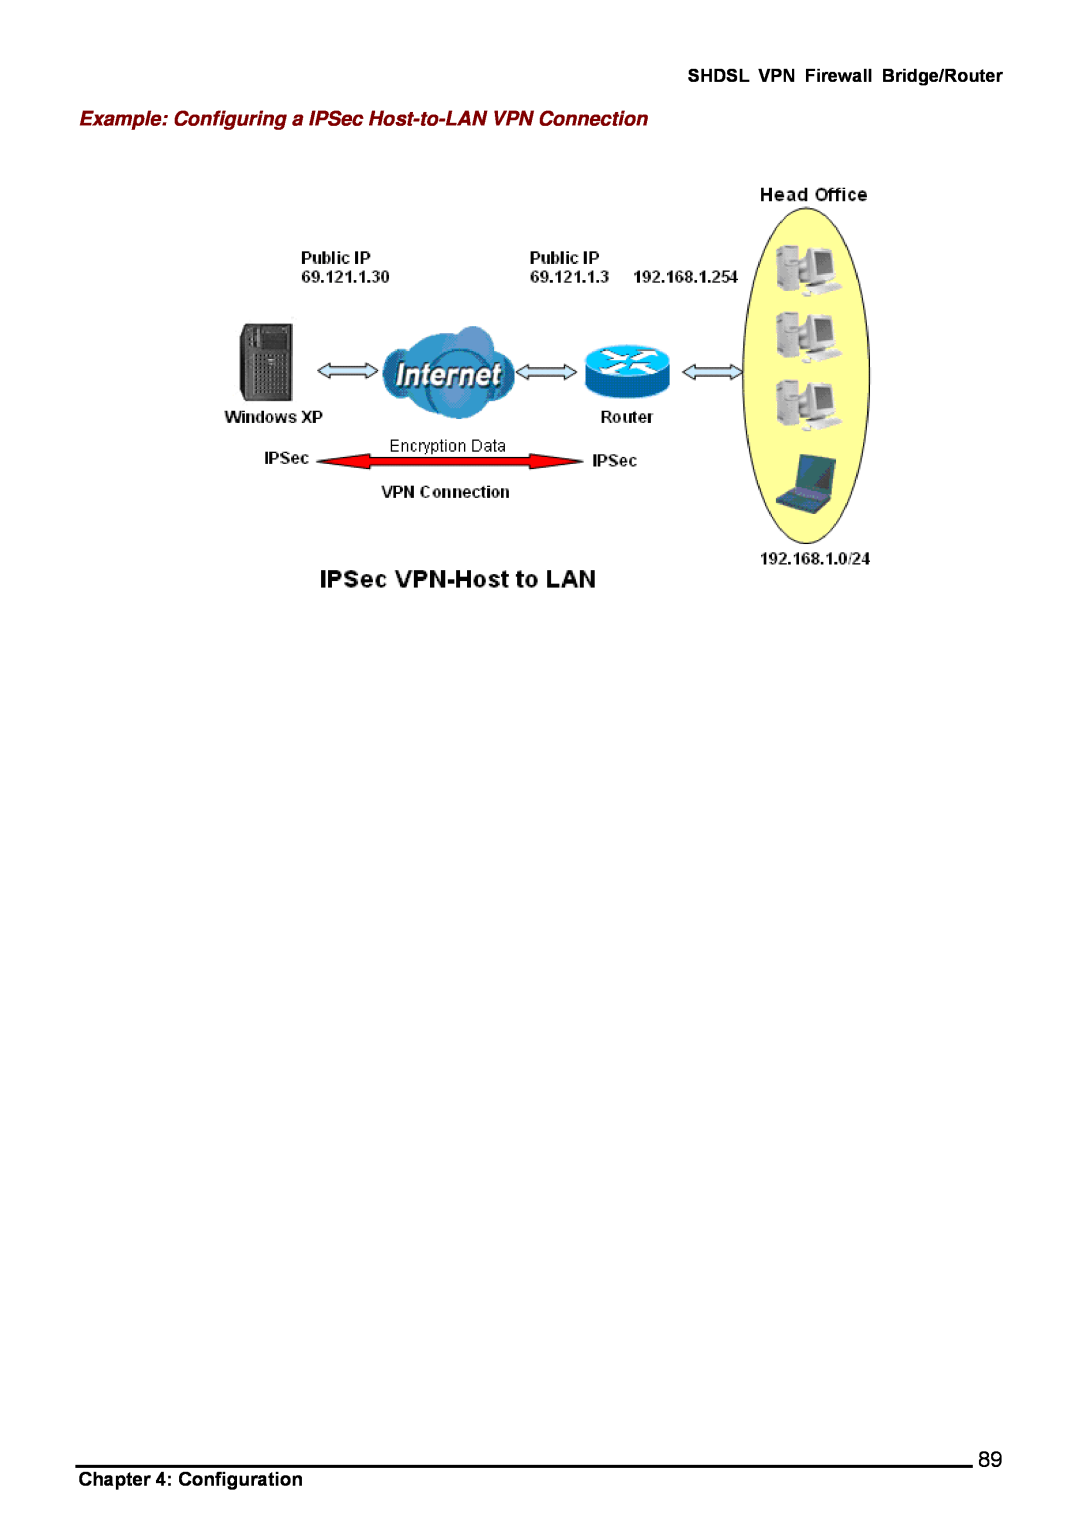 Billion Electric Company 8501 user manual Example Configuring a IPSec Host-to-LAN VPN Connection, Configuration 